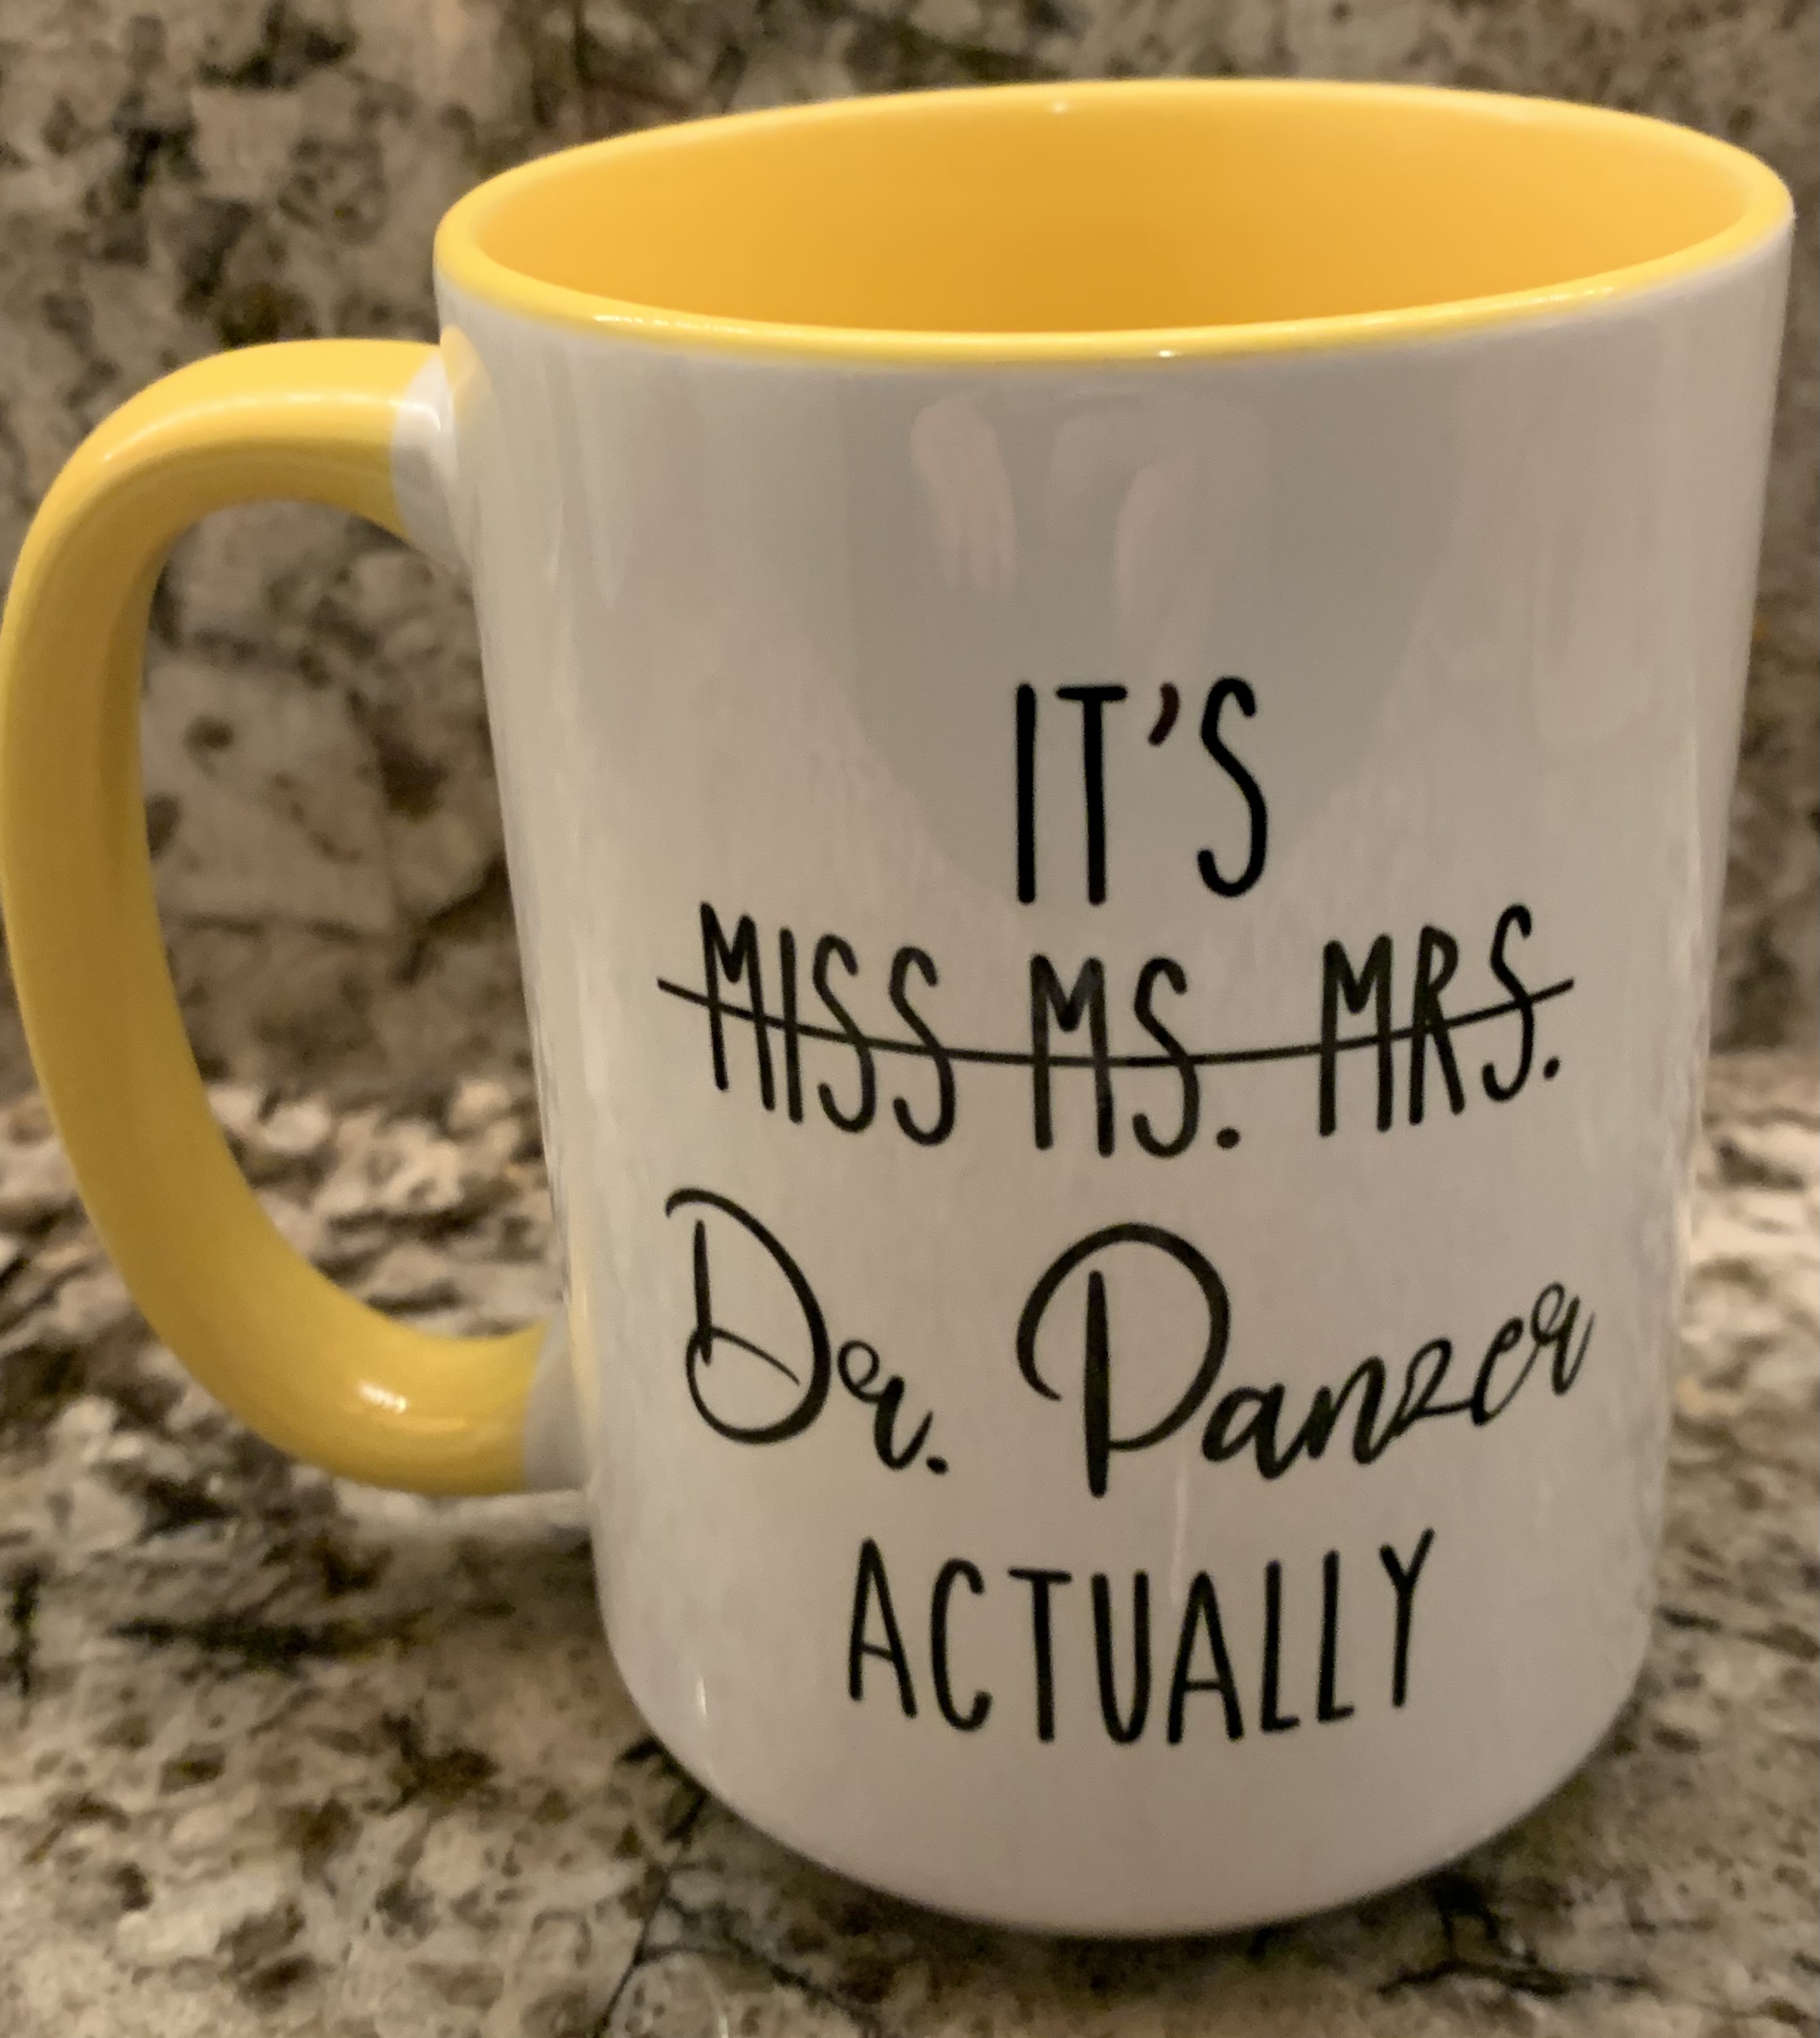 A large coffee mug with a sun-yellow handle and interior. The outside of the mug is white with black font. The words “Miss” “Ms.” and “Mrs.” are crossed out thus the text reads: “It’s Dr. Panzer actually”. Dr. Panzer is written in a fancier, cursive font to add emphasis.